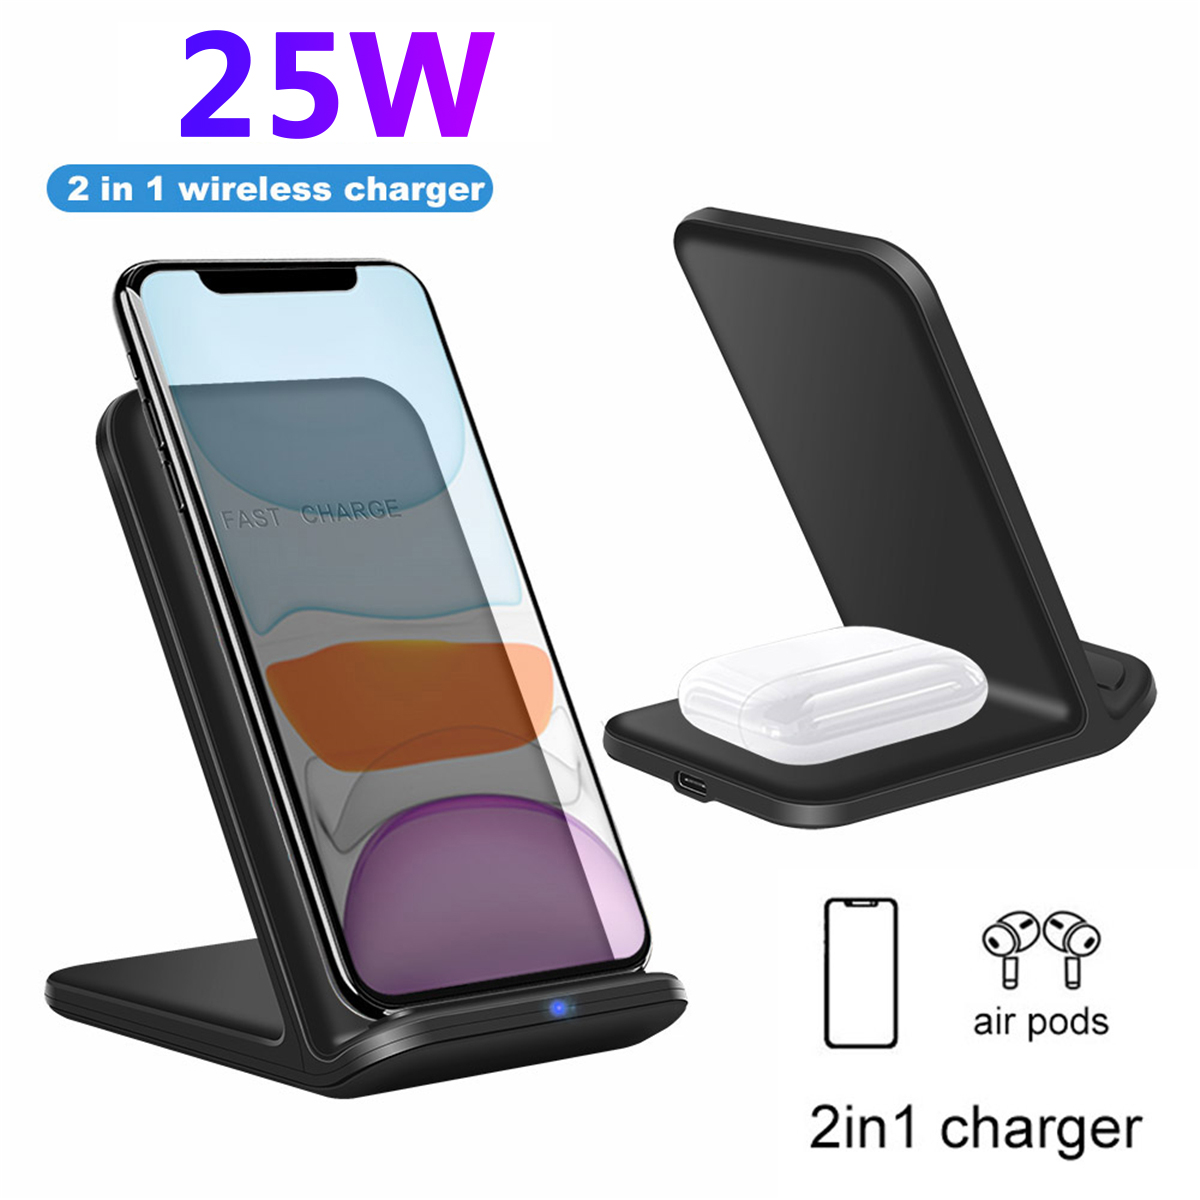 2 In 1 25W Qi Wireless Charger Dock Stand Fast Wireless Charging Pad Phone Holder For Qi-enabled Smart Phones iPhone Samsung